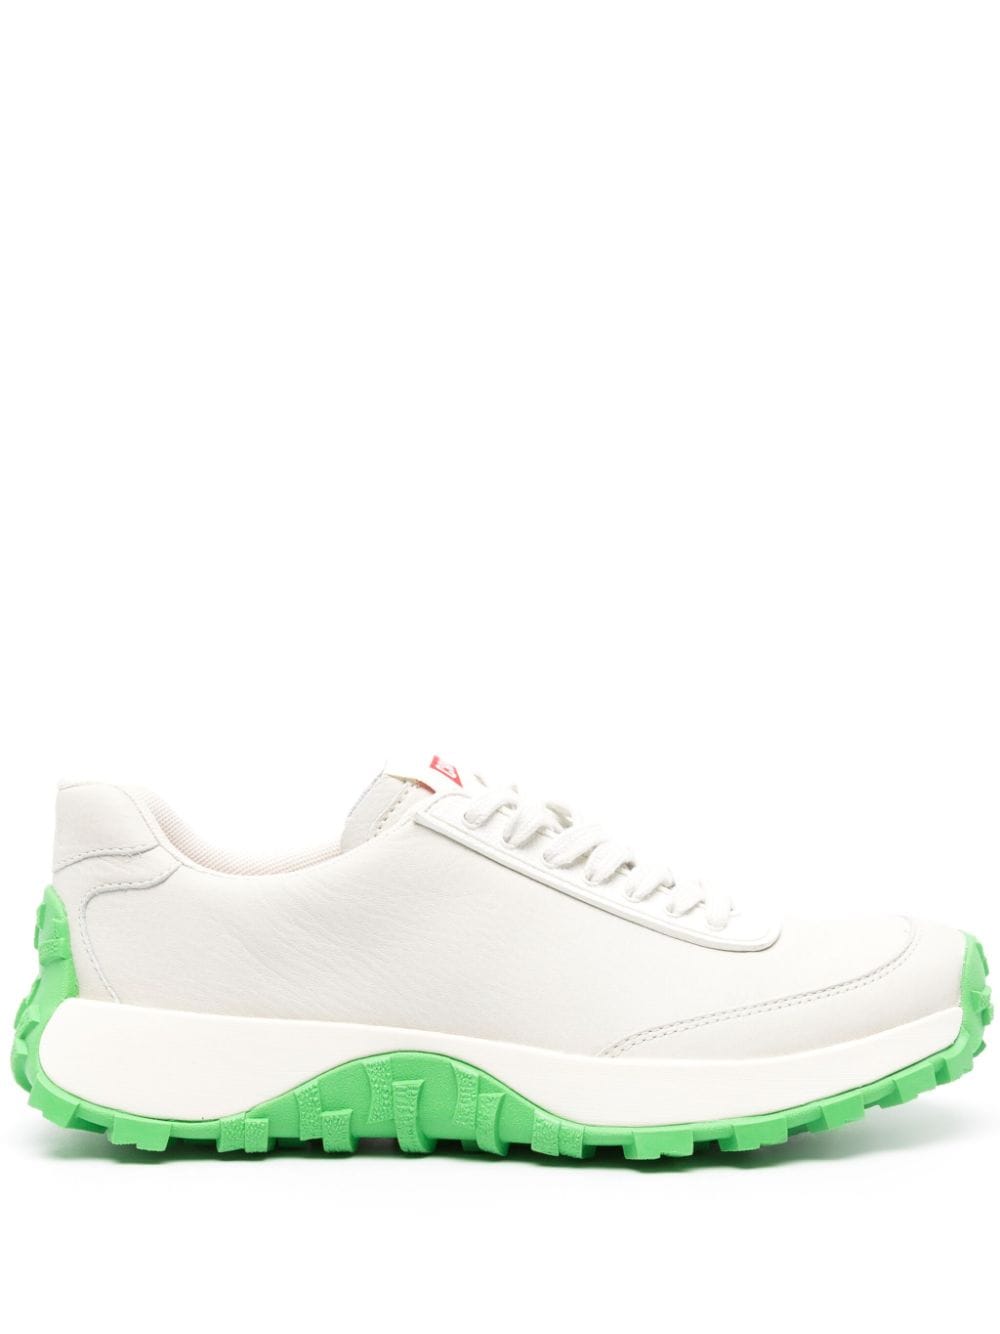 Camper Drift Trail Leather Trainers In White Natural